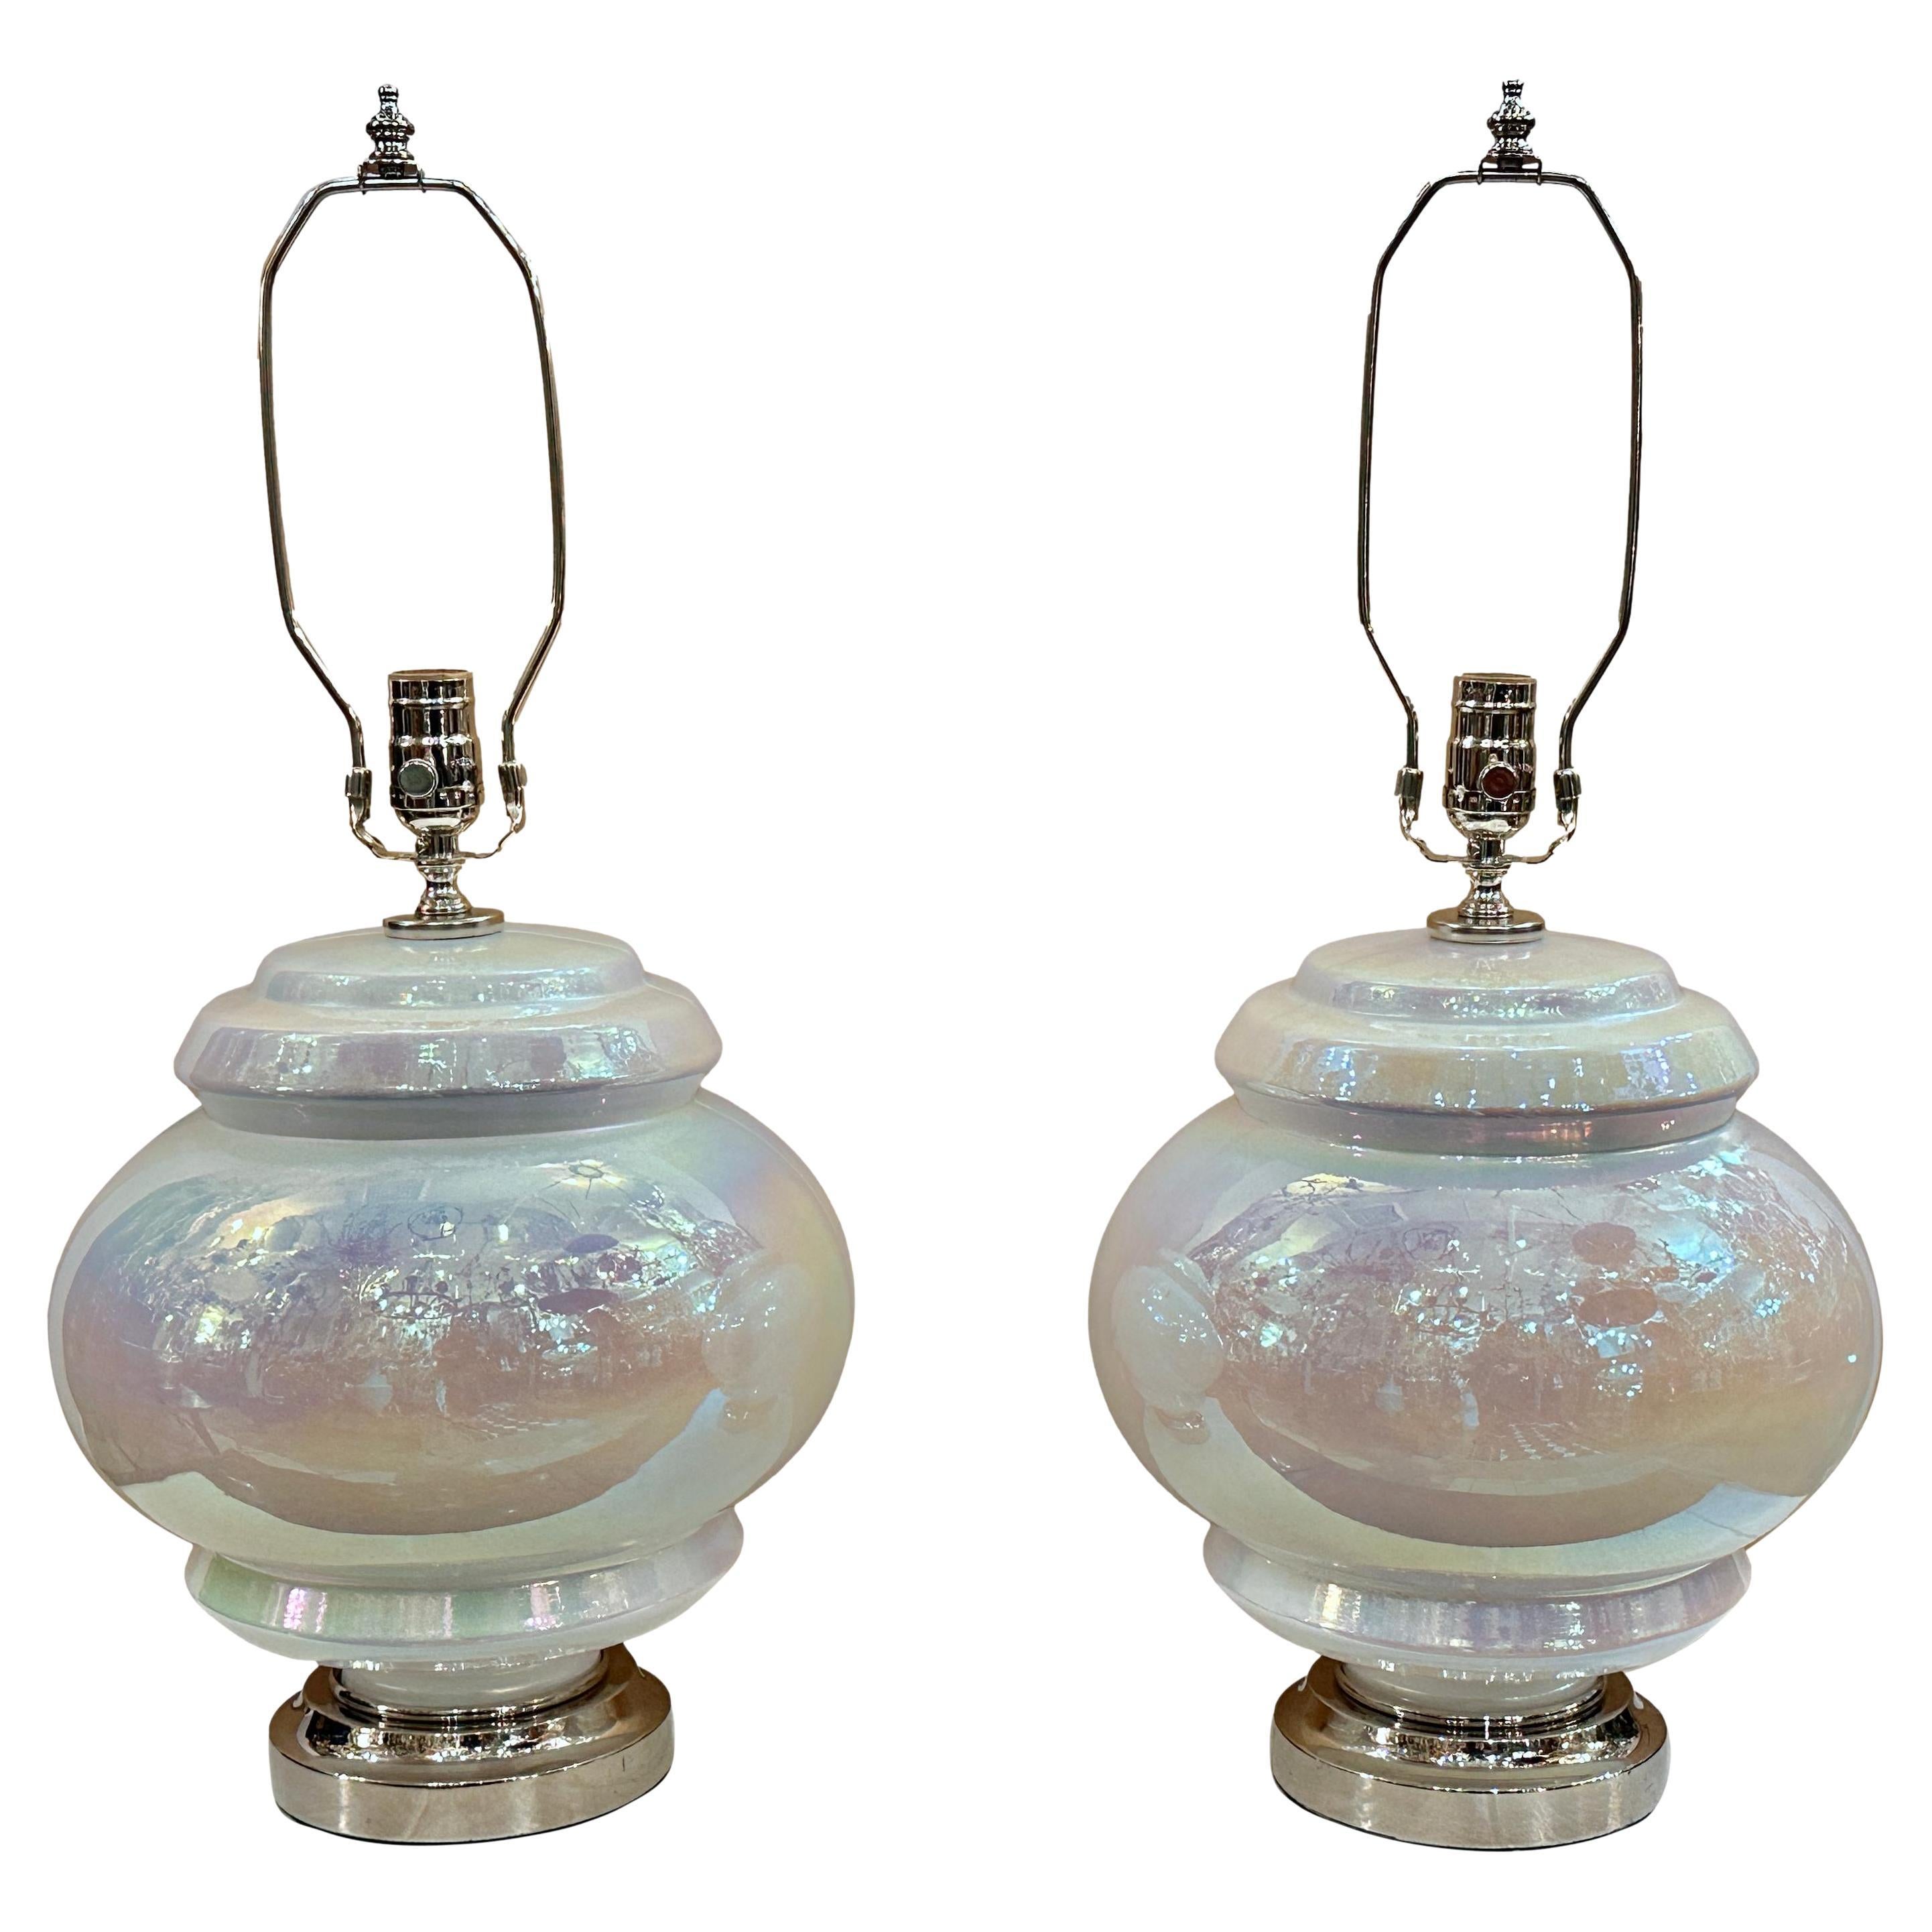 Pair of Midcentury Pearlescent Glass Lamps